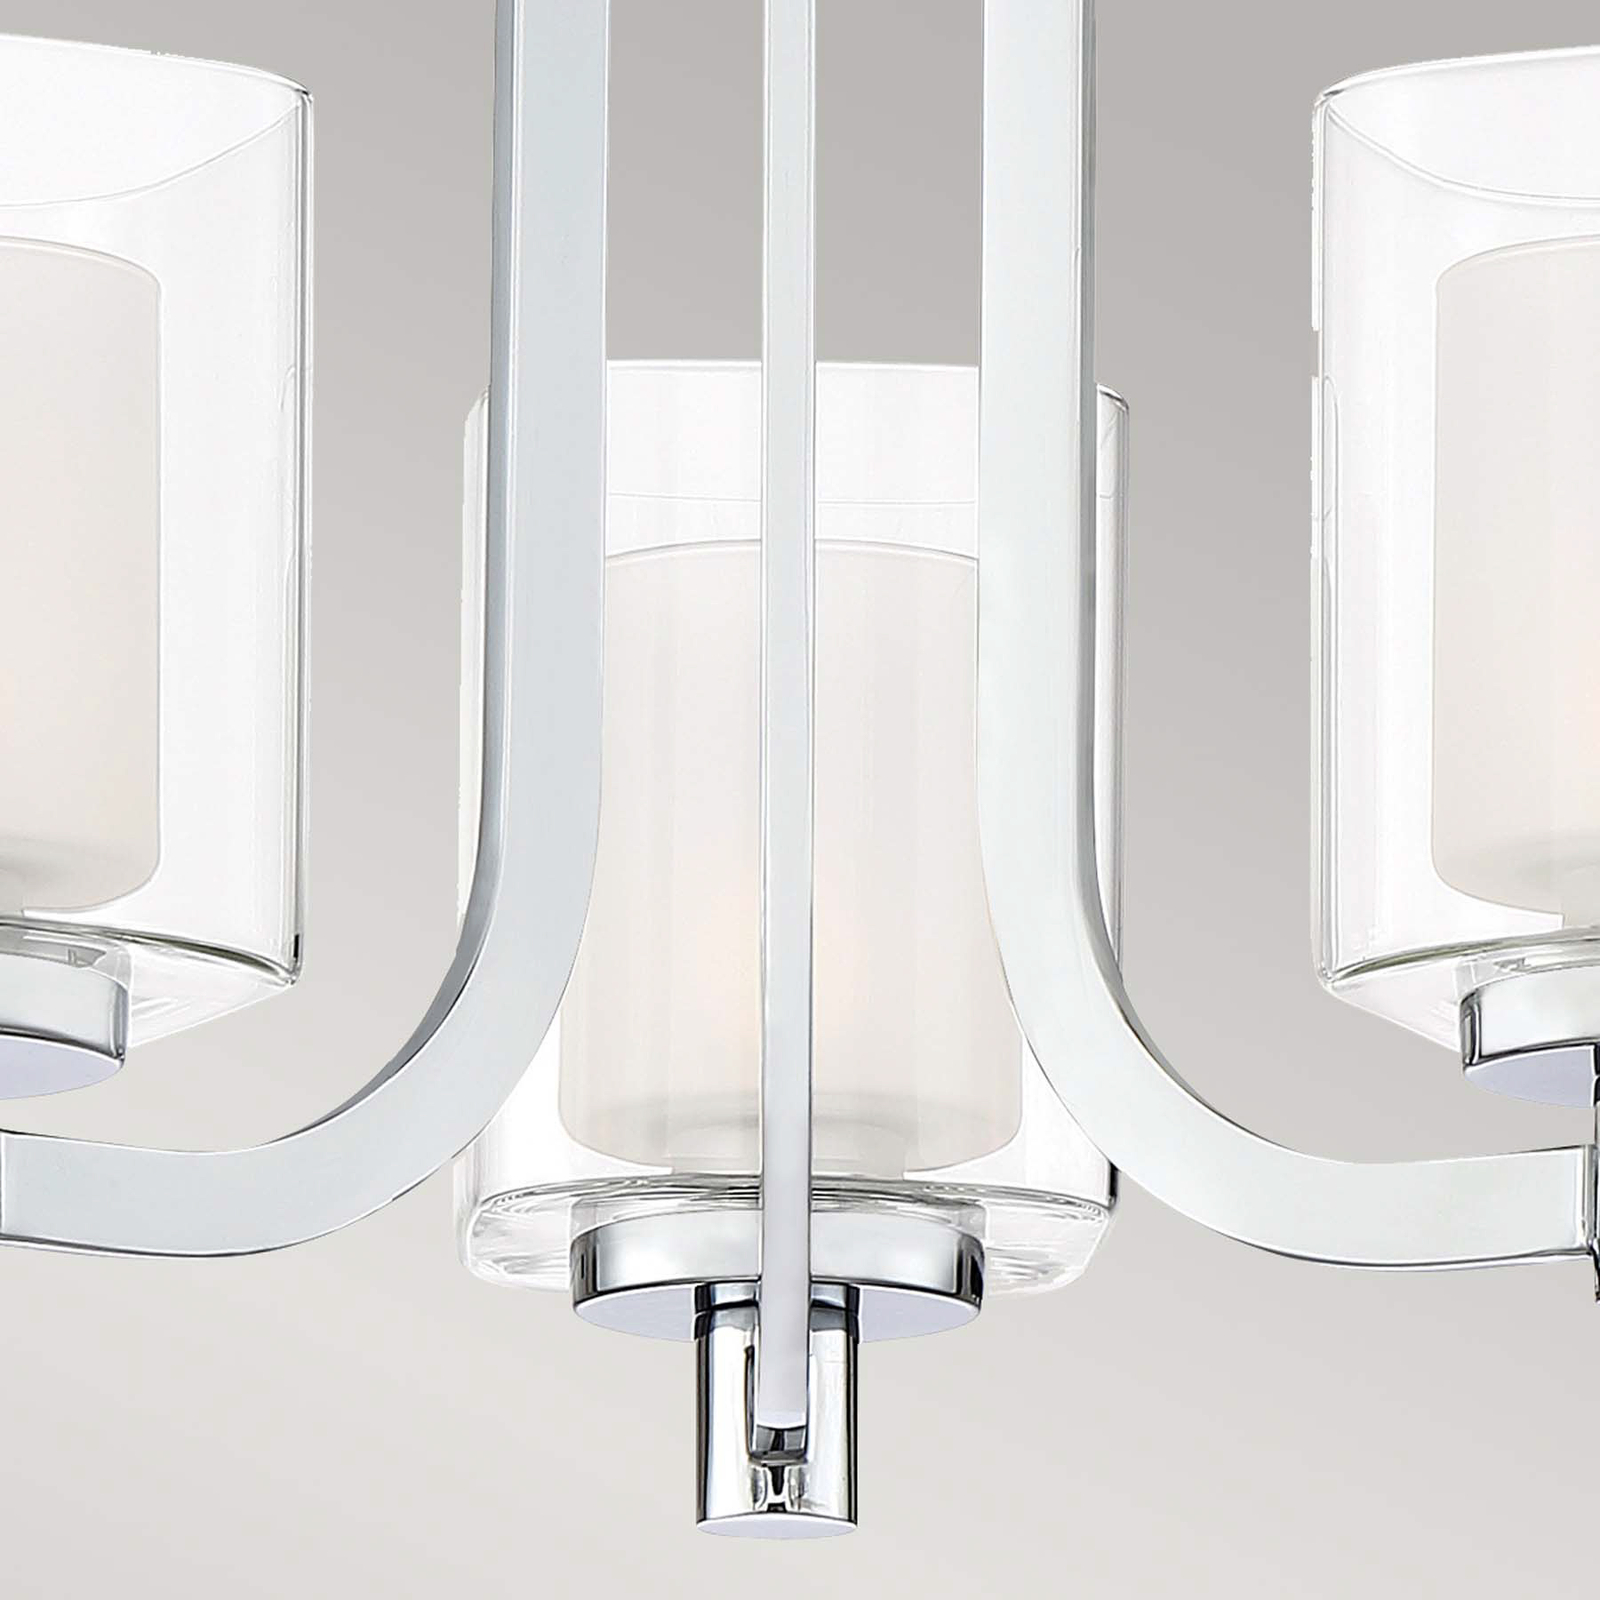 Kolt IP44 ceiling light with double glass shades